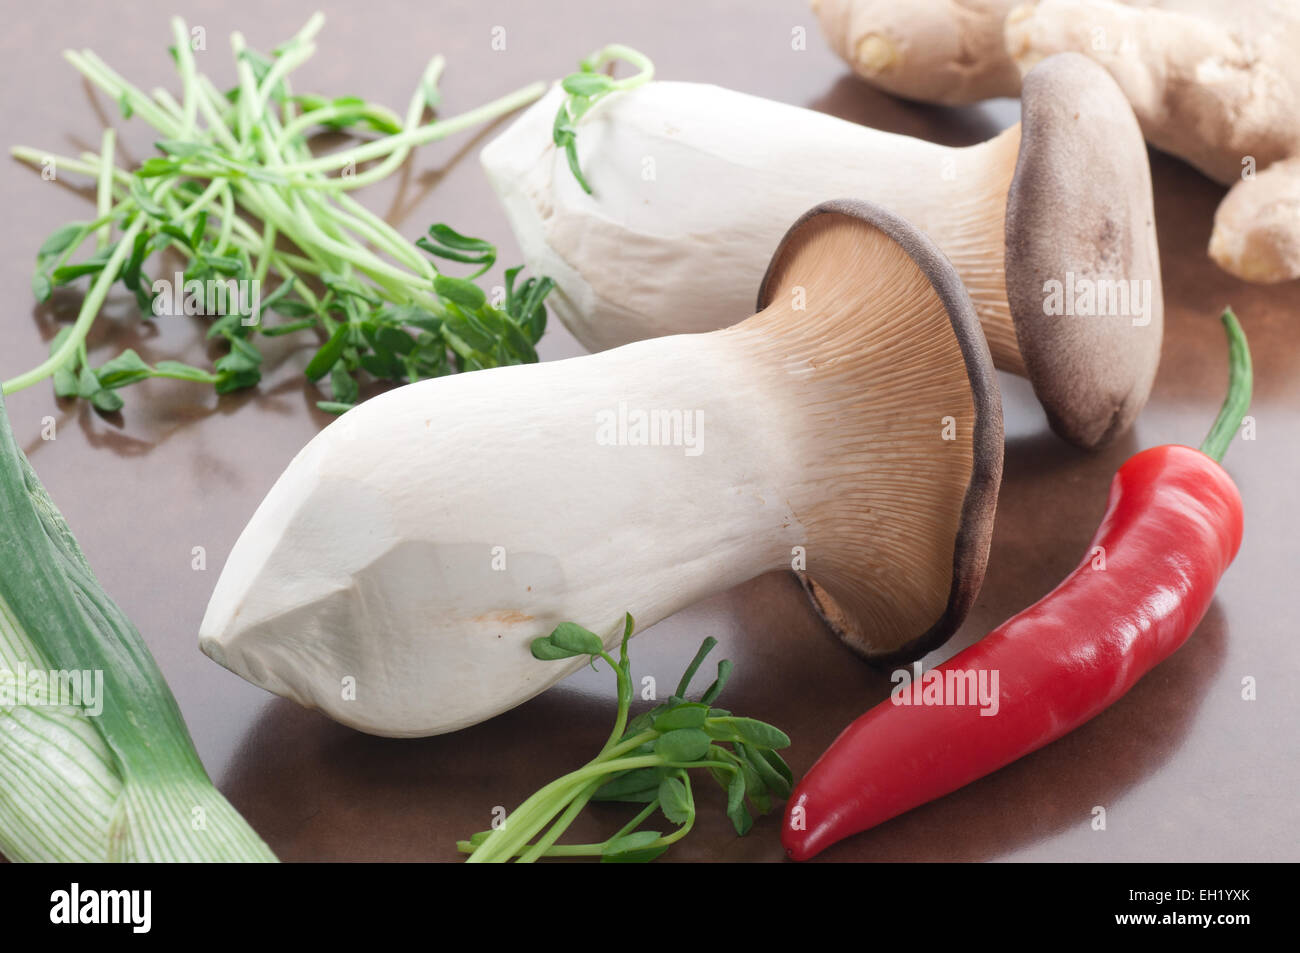 King oyster mushrooms, red chili, pea shoots, leek and fresh ginger. Stock Photo